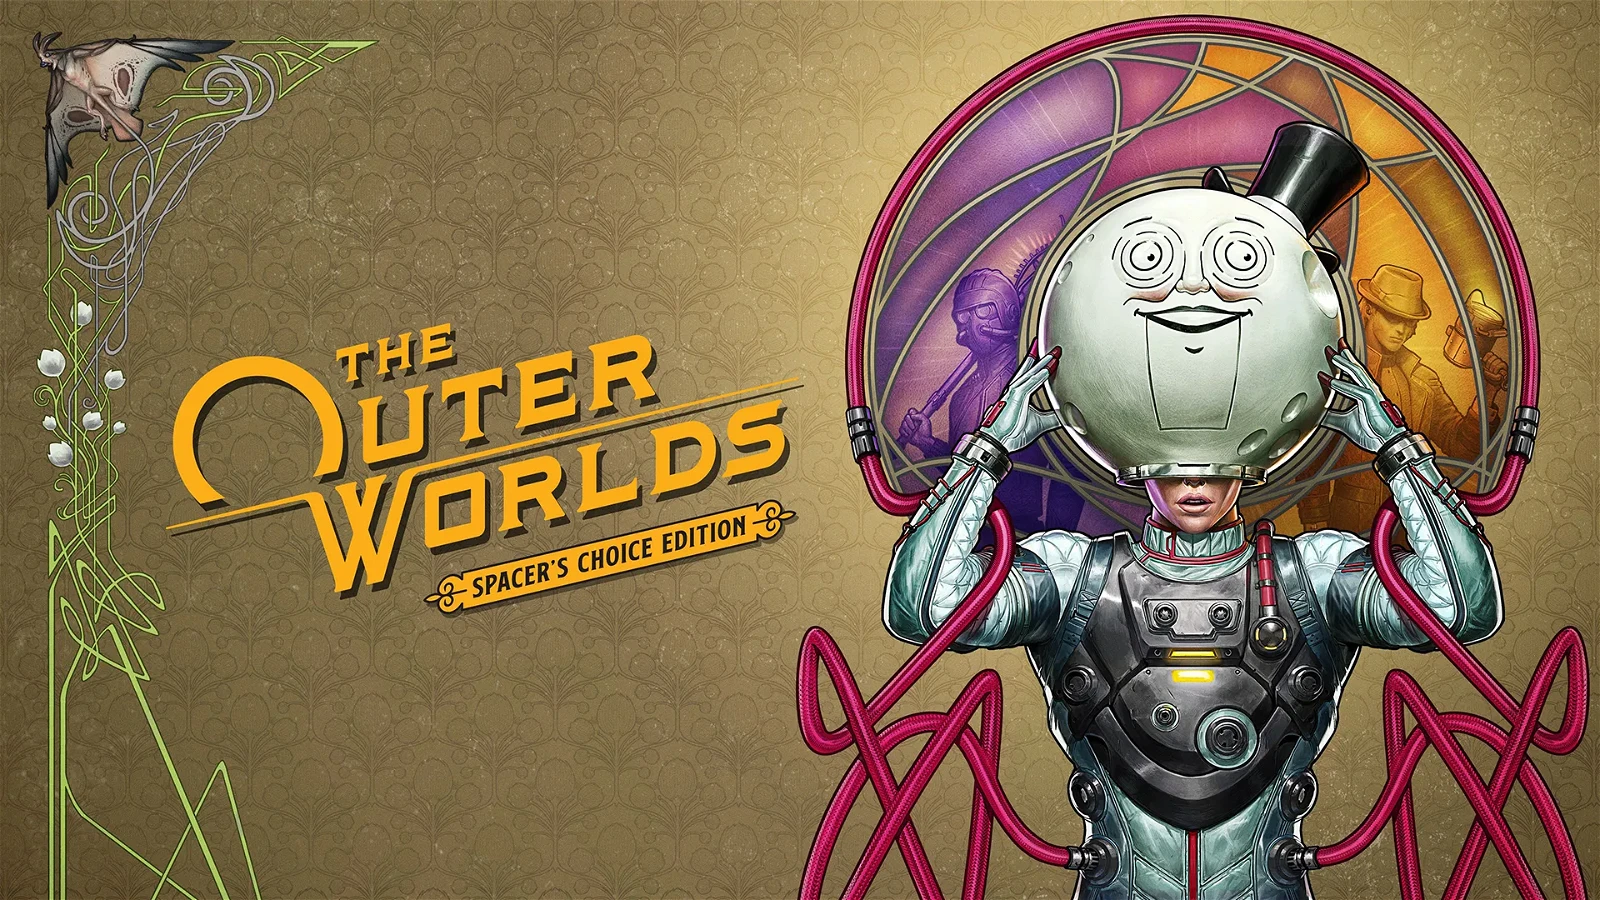 The Outer Worlds: Spacer's Choice Edition can be enjoyed by PS Plus subscribers 